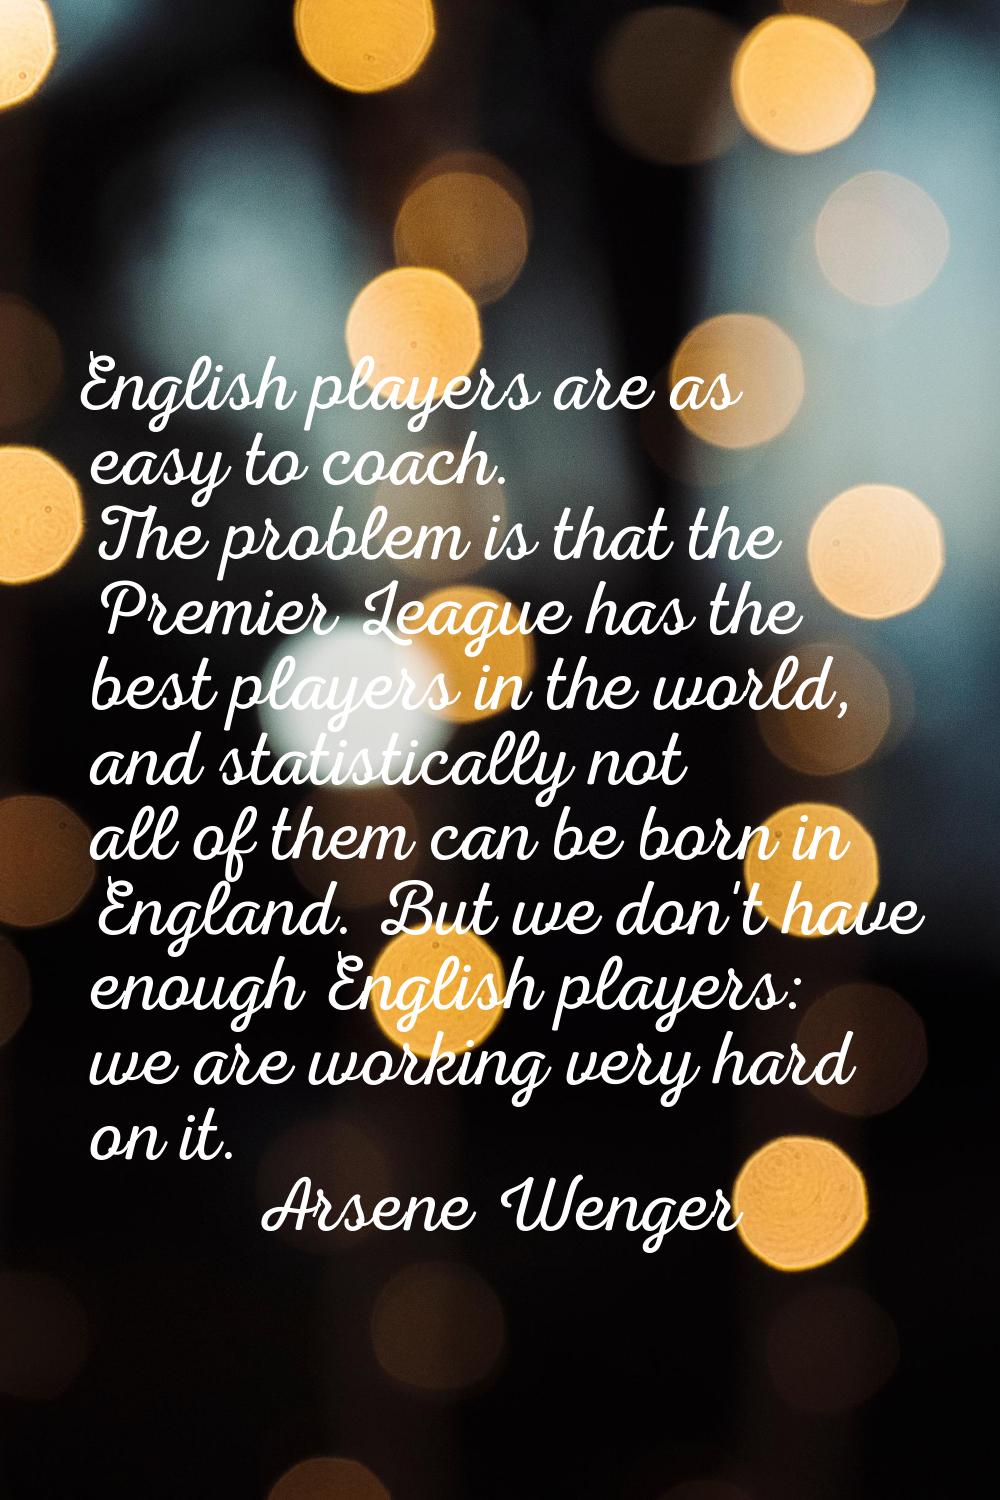 English players are as easy to coach. The problem is that the Premier League has the best players i